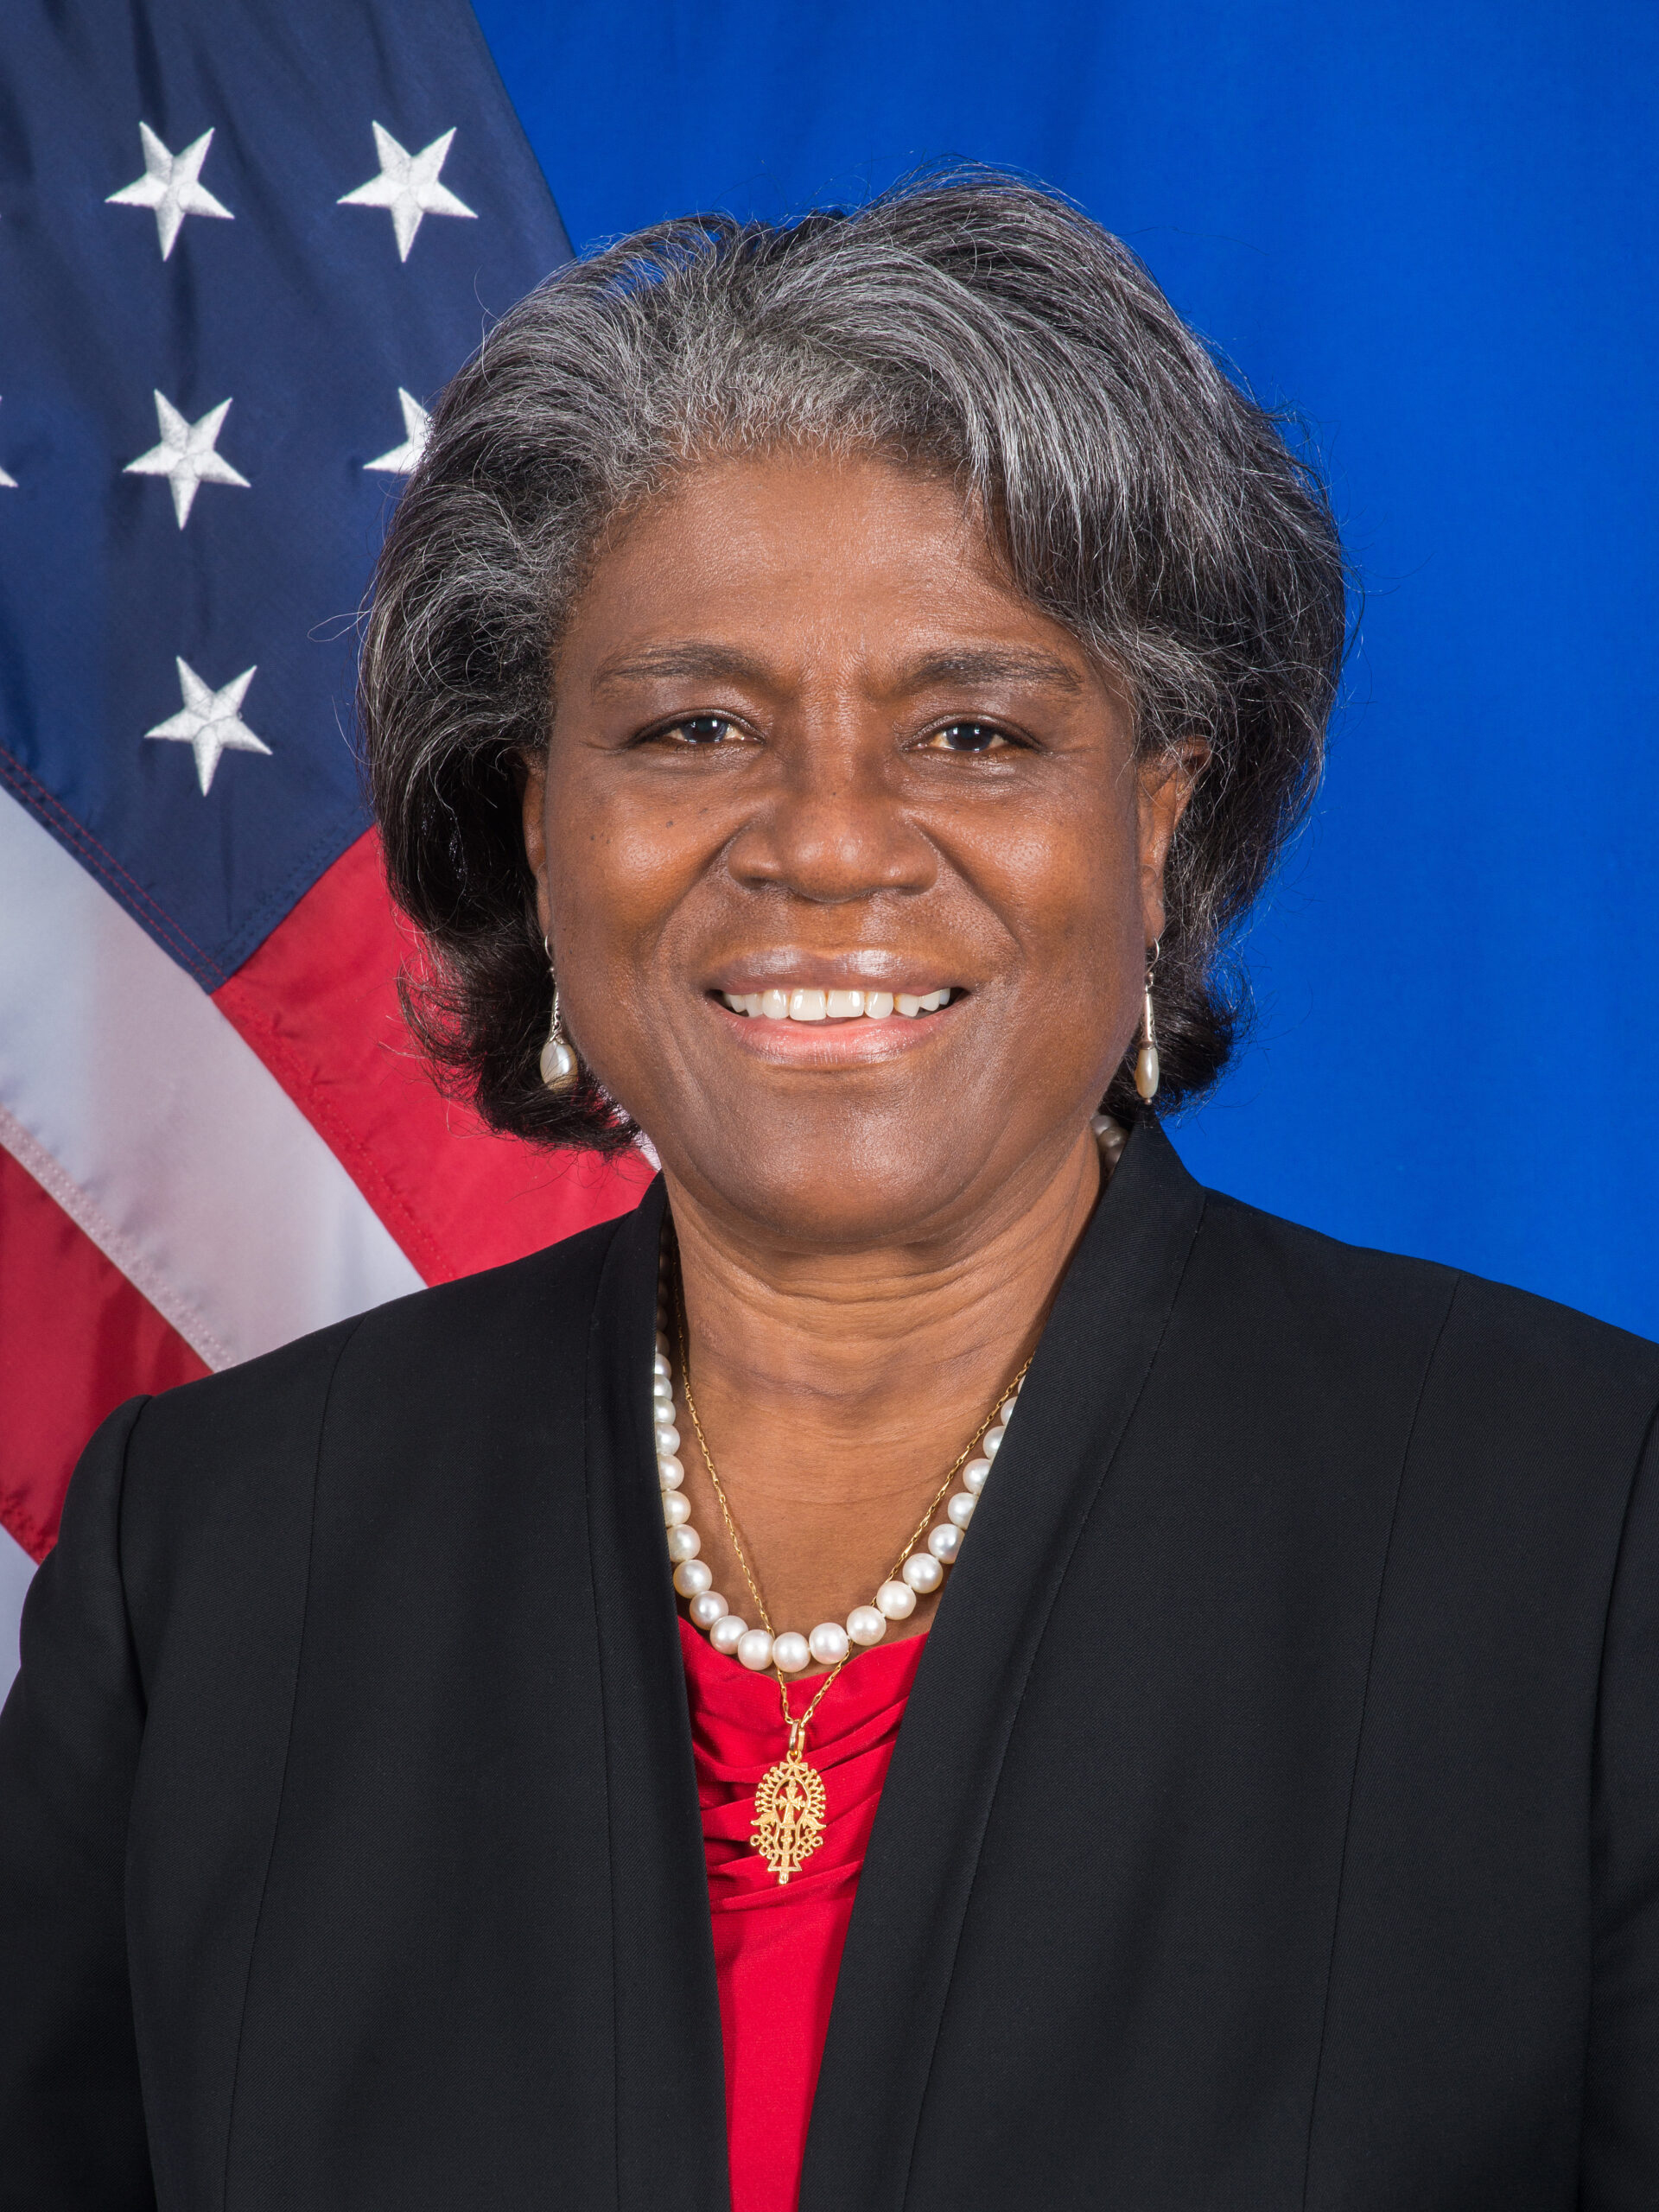 The Honorable Linda Thomas-Greenfield, U.S. Representative to the United Nations